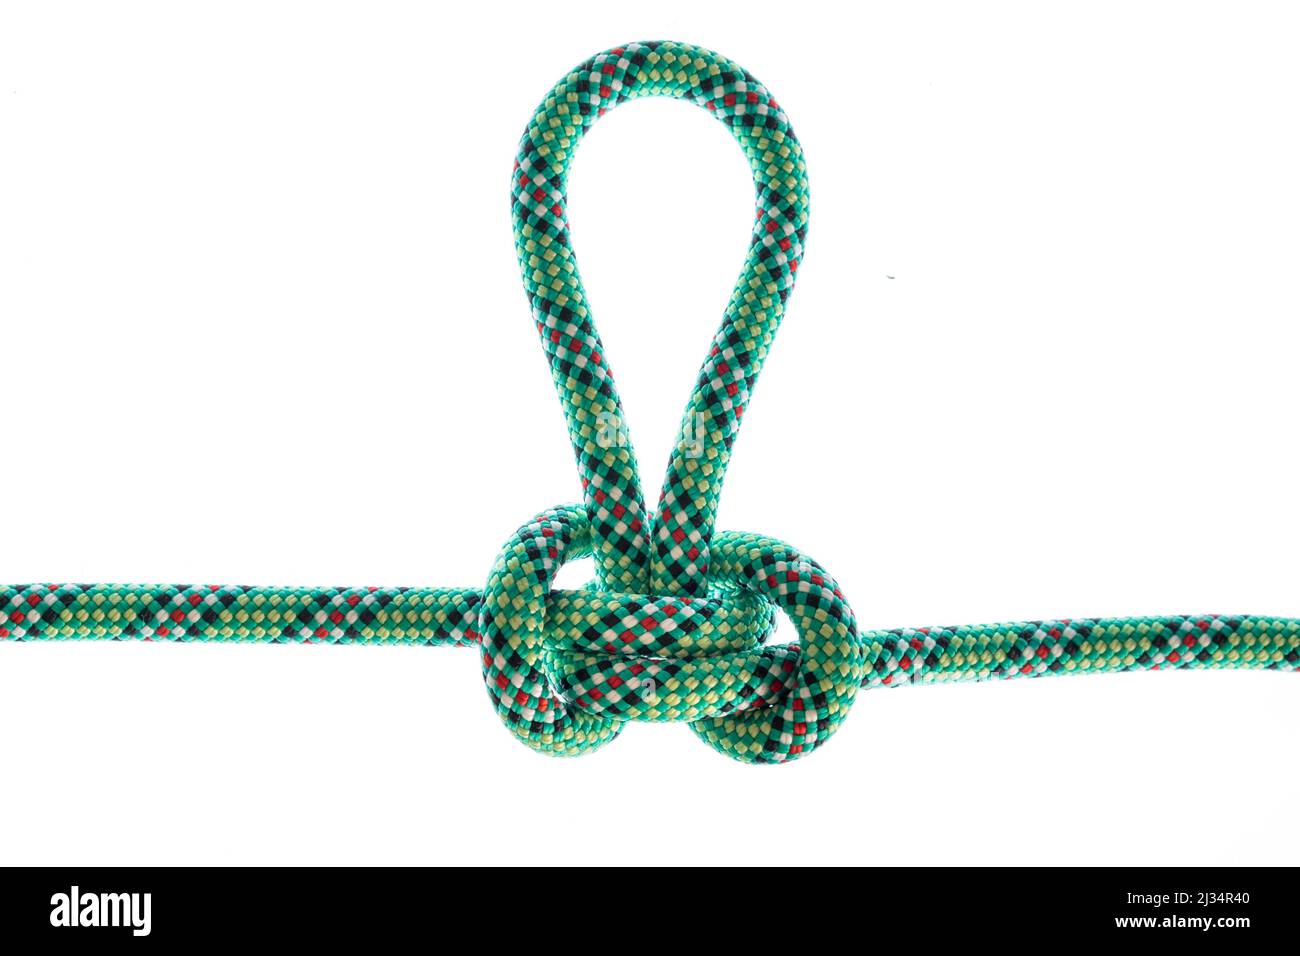 Albright Knot stock photo. Image of bends, alpine, rope - 13864398